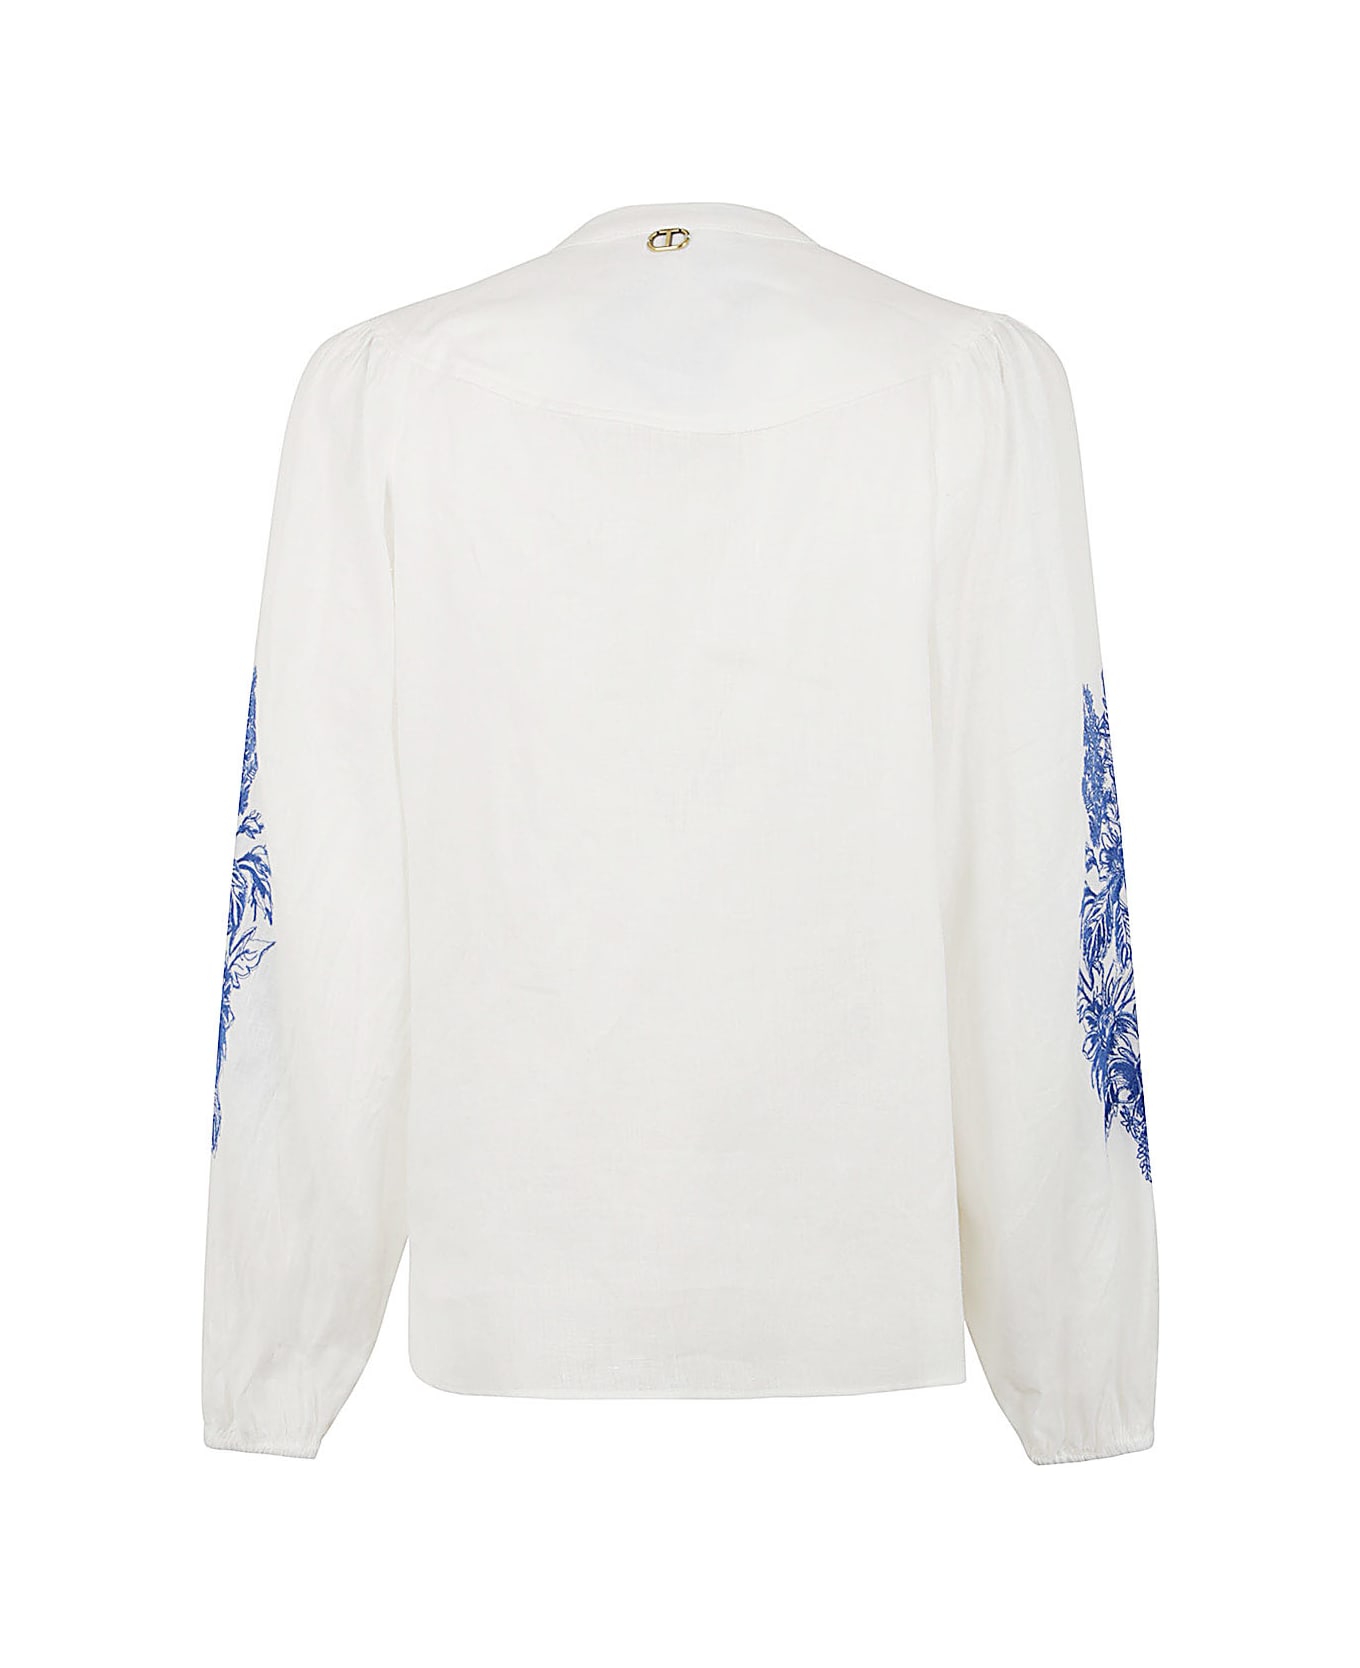 TwinSet Embroidered Long Sleeve Shirt - Blue White